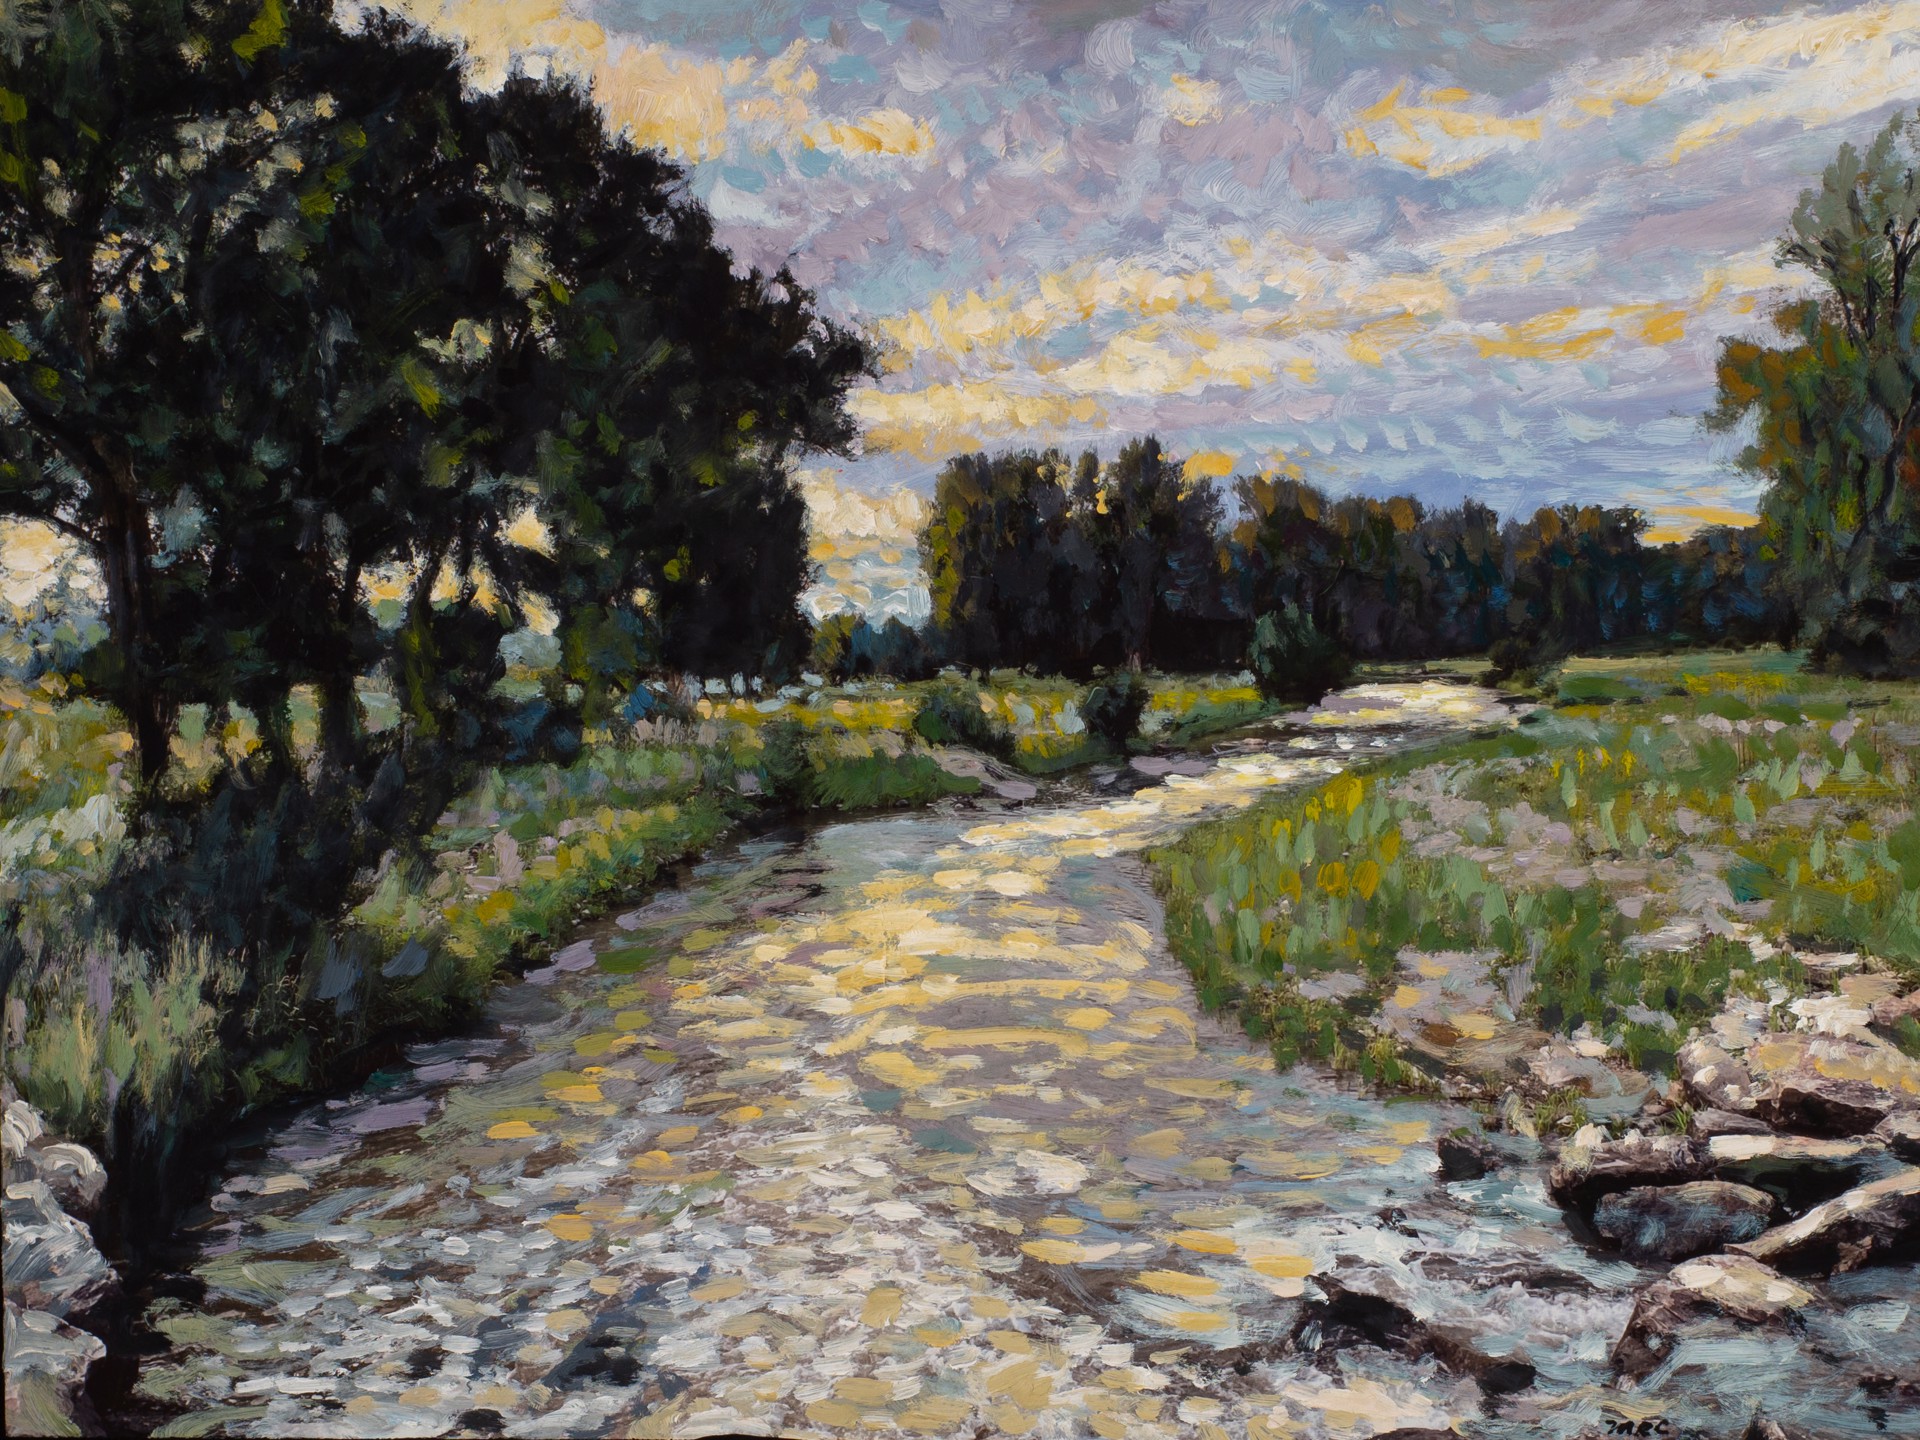 Chama River, Morning Light (Chama River Valley Series) by Michael Roque Collins